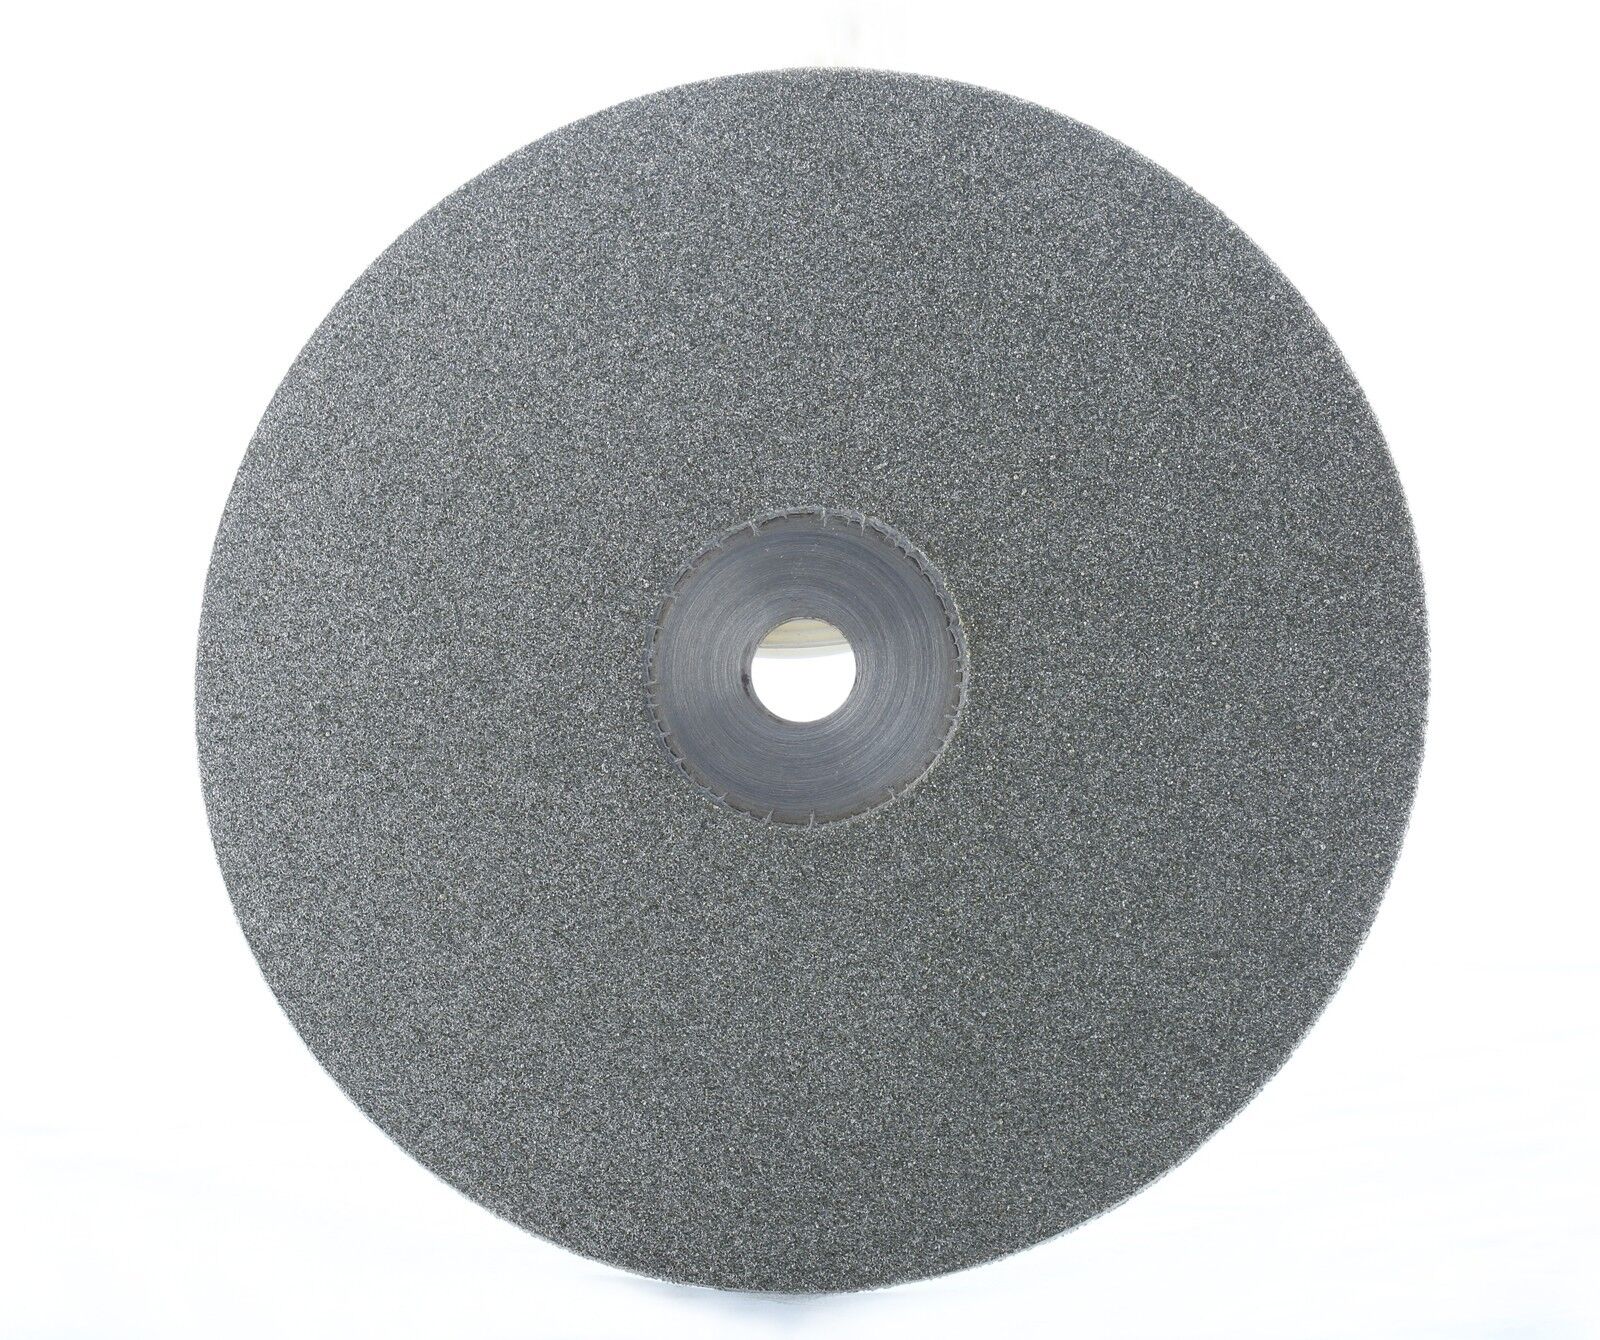 8"x1/2" 3000grit Lapidary Glass Diamond Magnetic Backing Flat Lap Lapping Disc